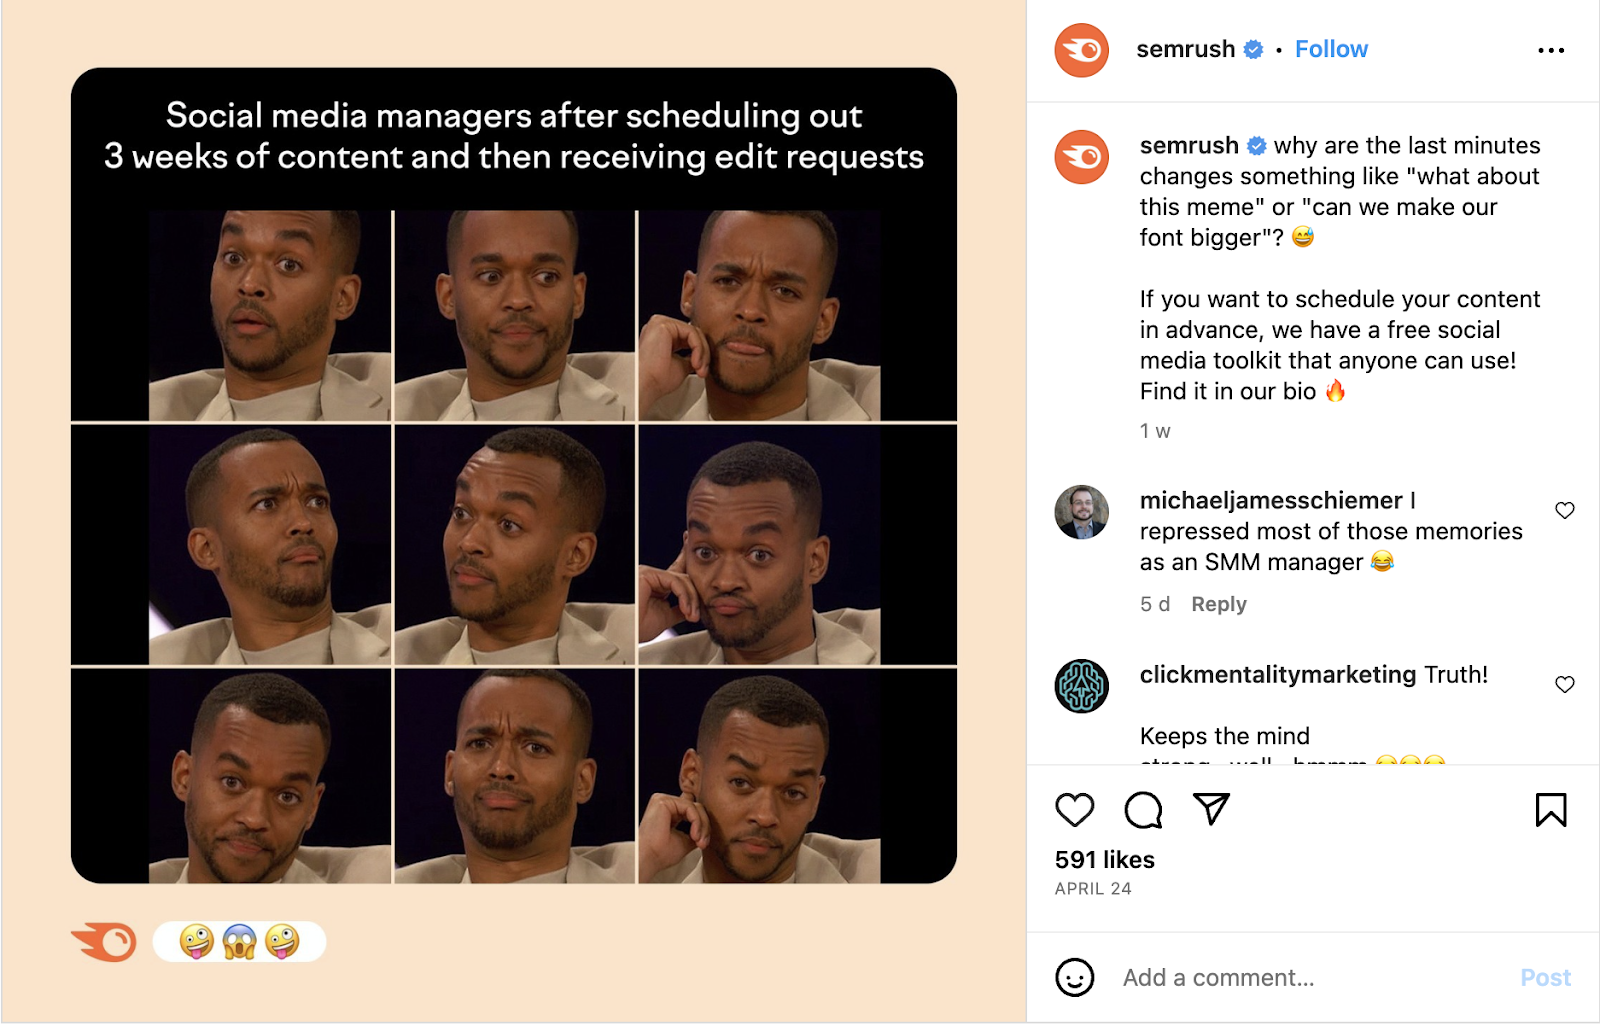 an example of a meme from Semrush Instagram account